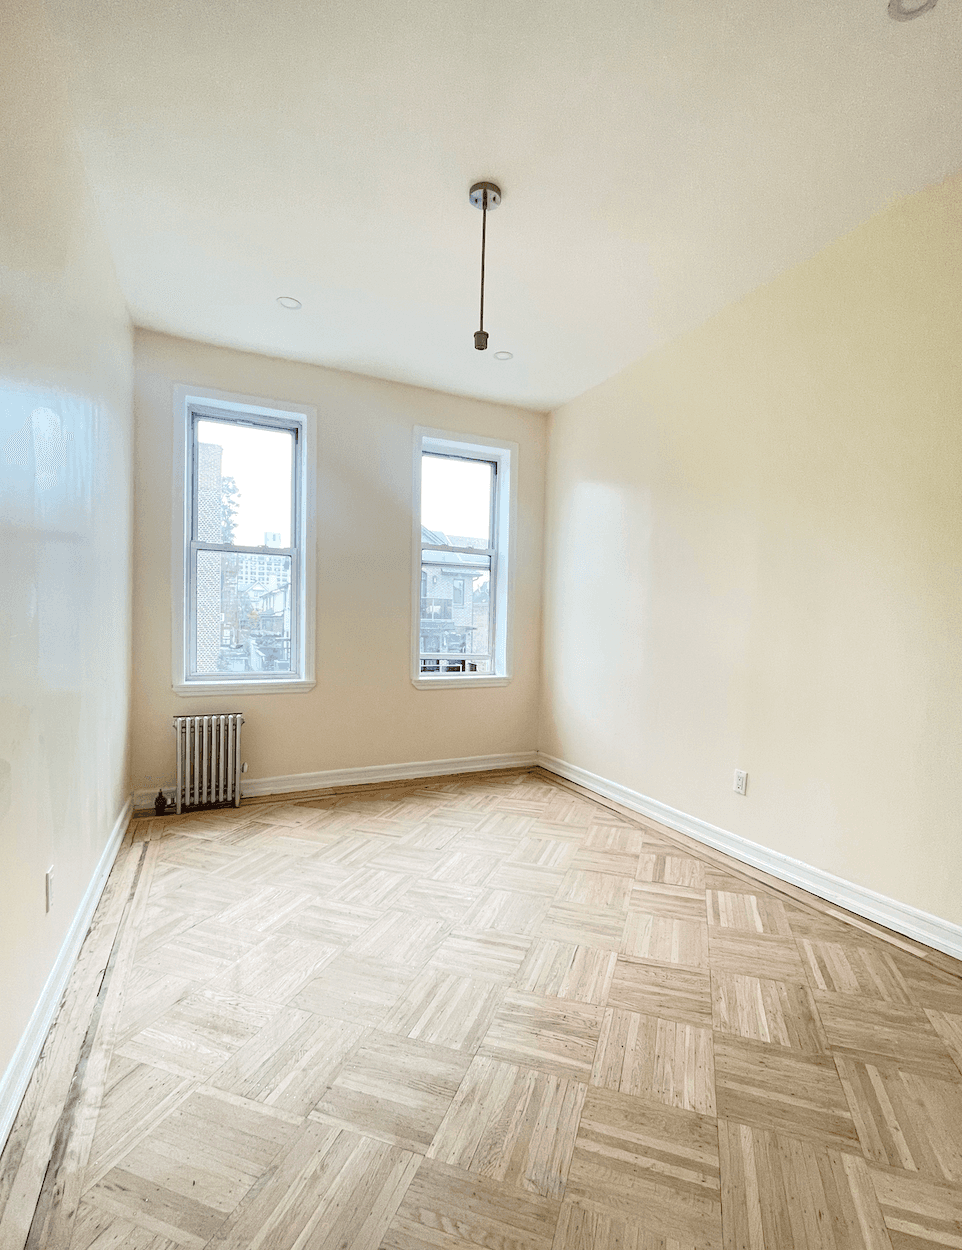 Newly renovated and very spacious 3 bed 1 bath on the second floor of a house.